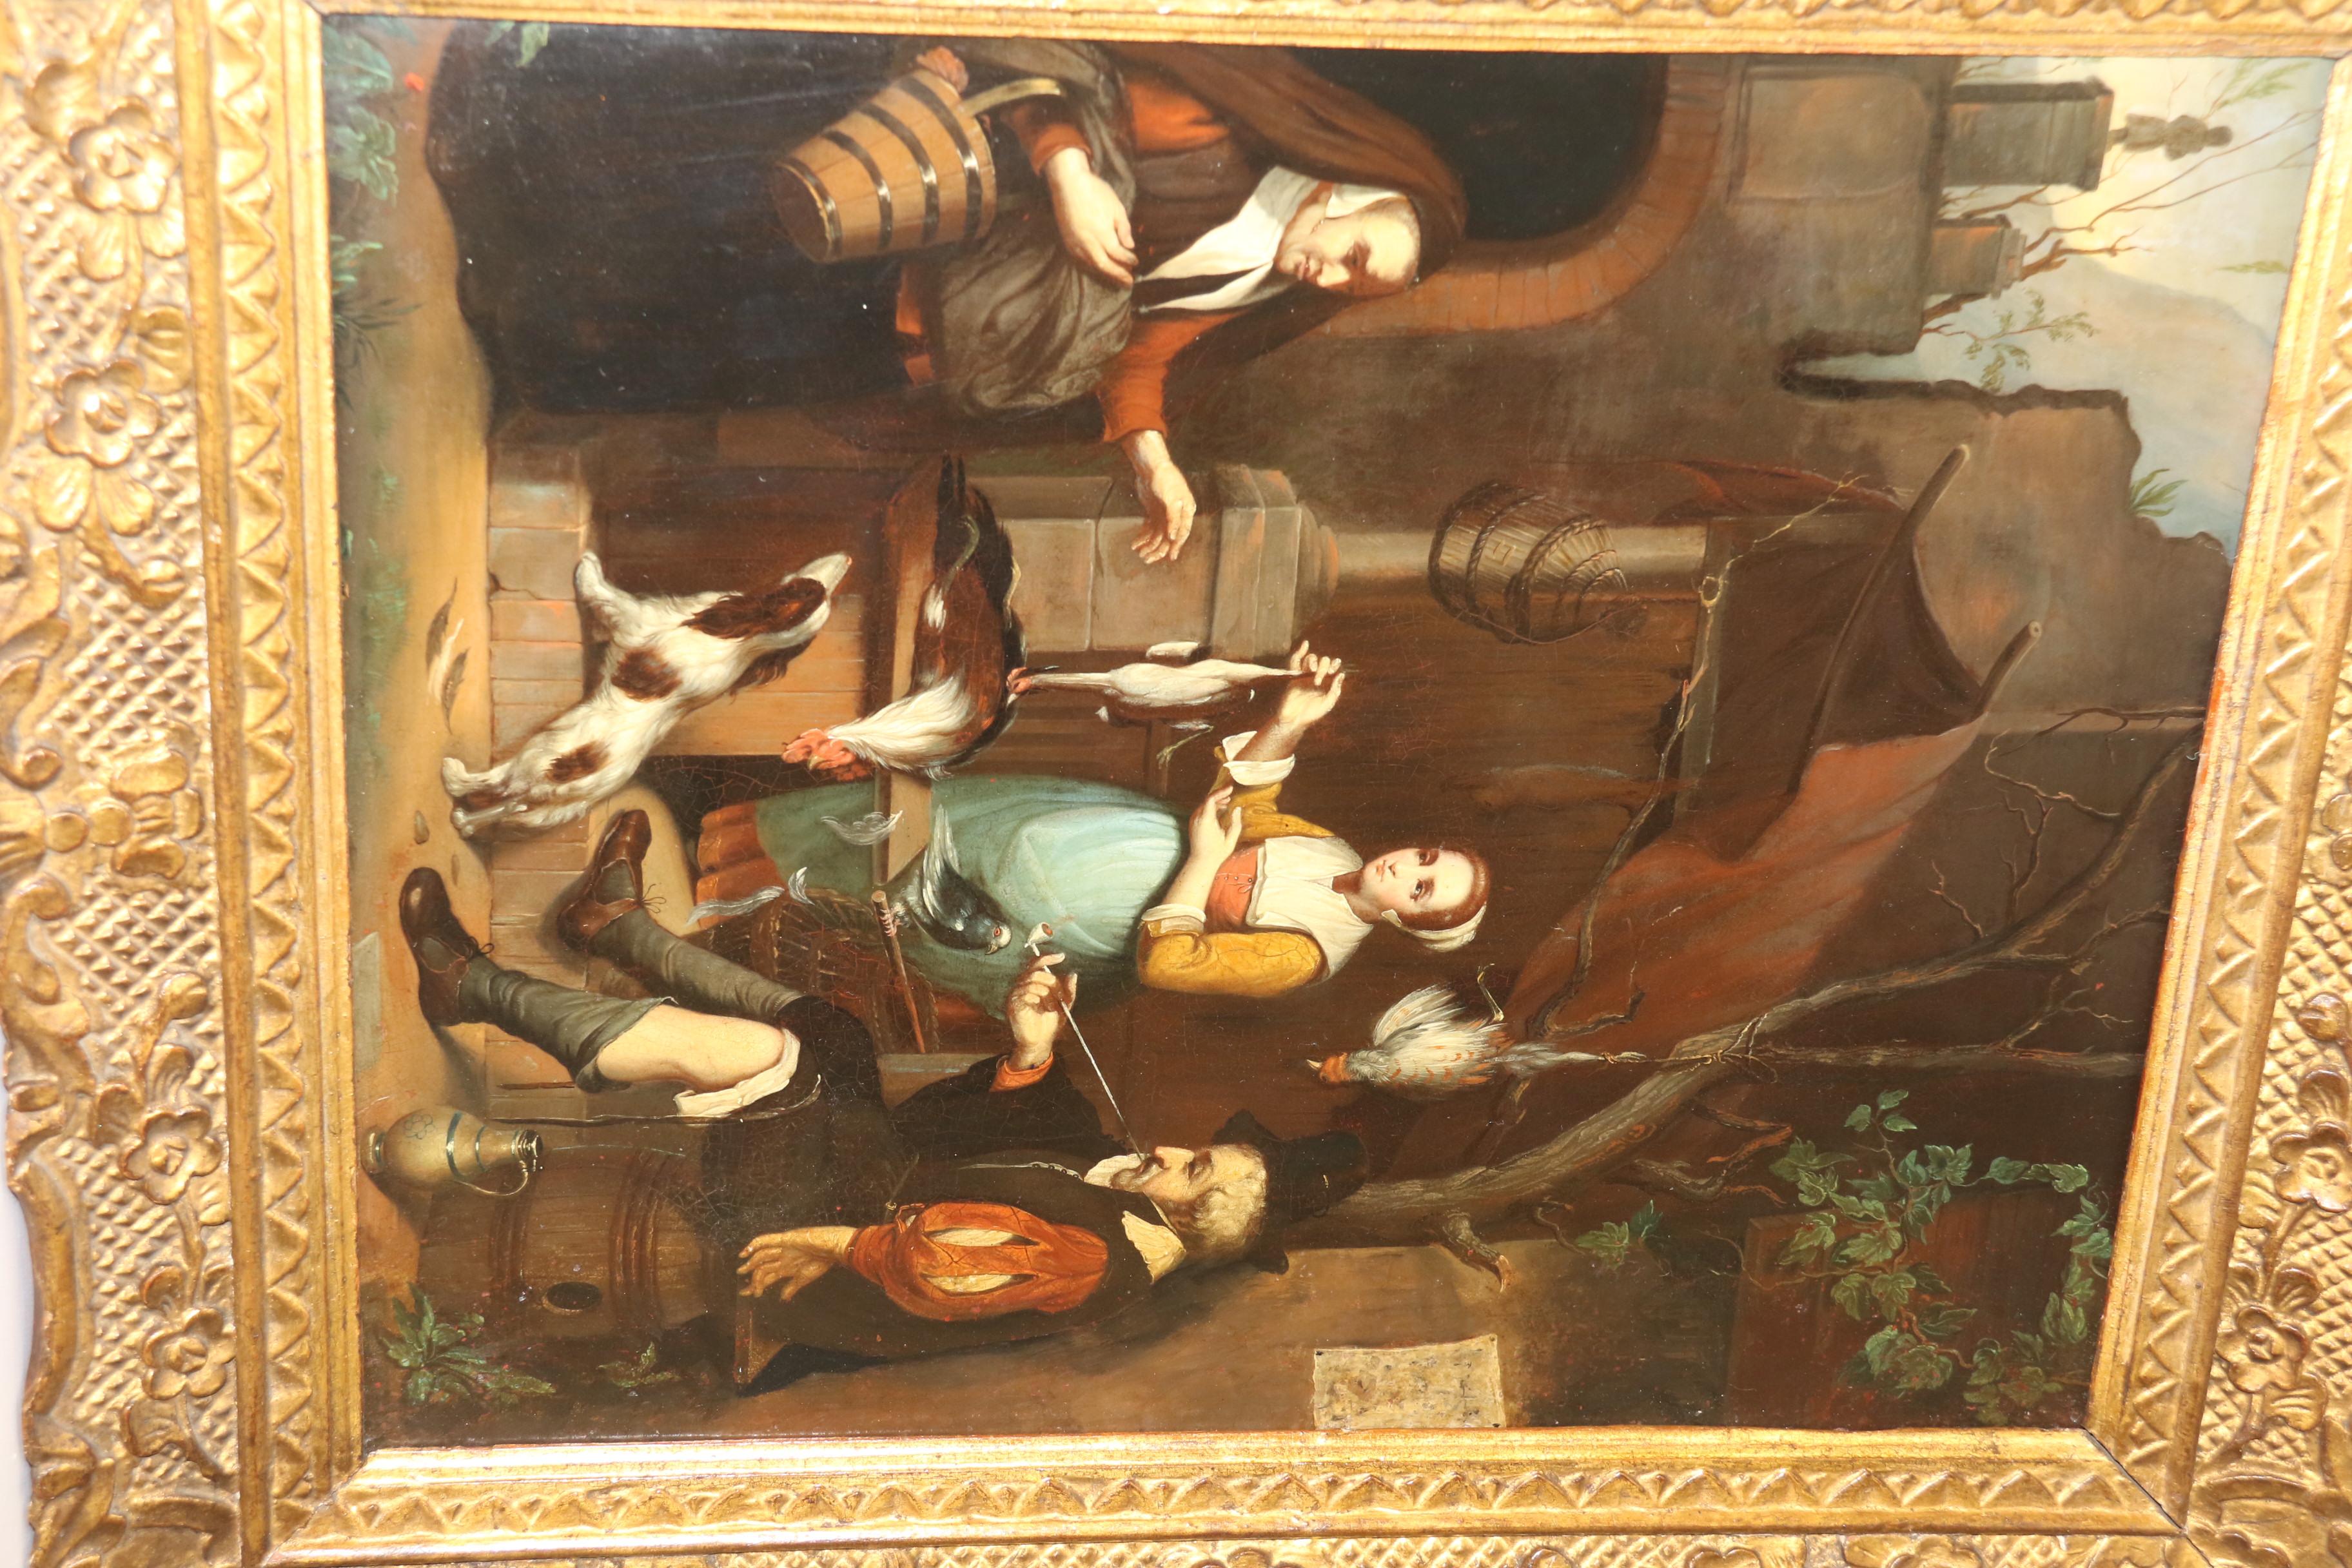 This fine quality oil painting on steel panel was produced in the 19th century in the revival of the earlier Dutch 16th century style and depicts a group of people, two ladies, the older one looking at fowl and the younger one showing samples of